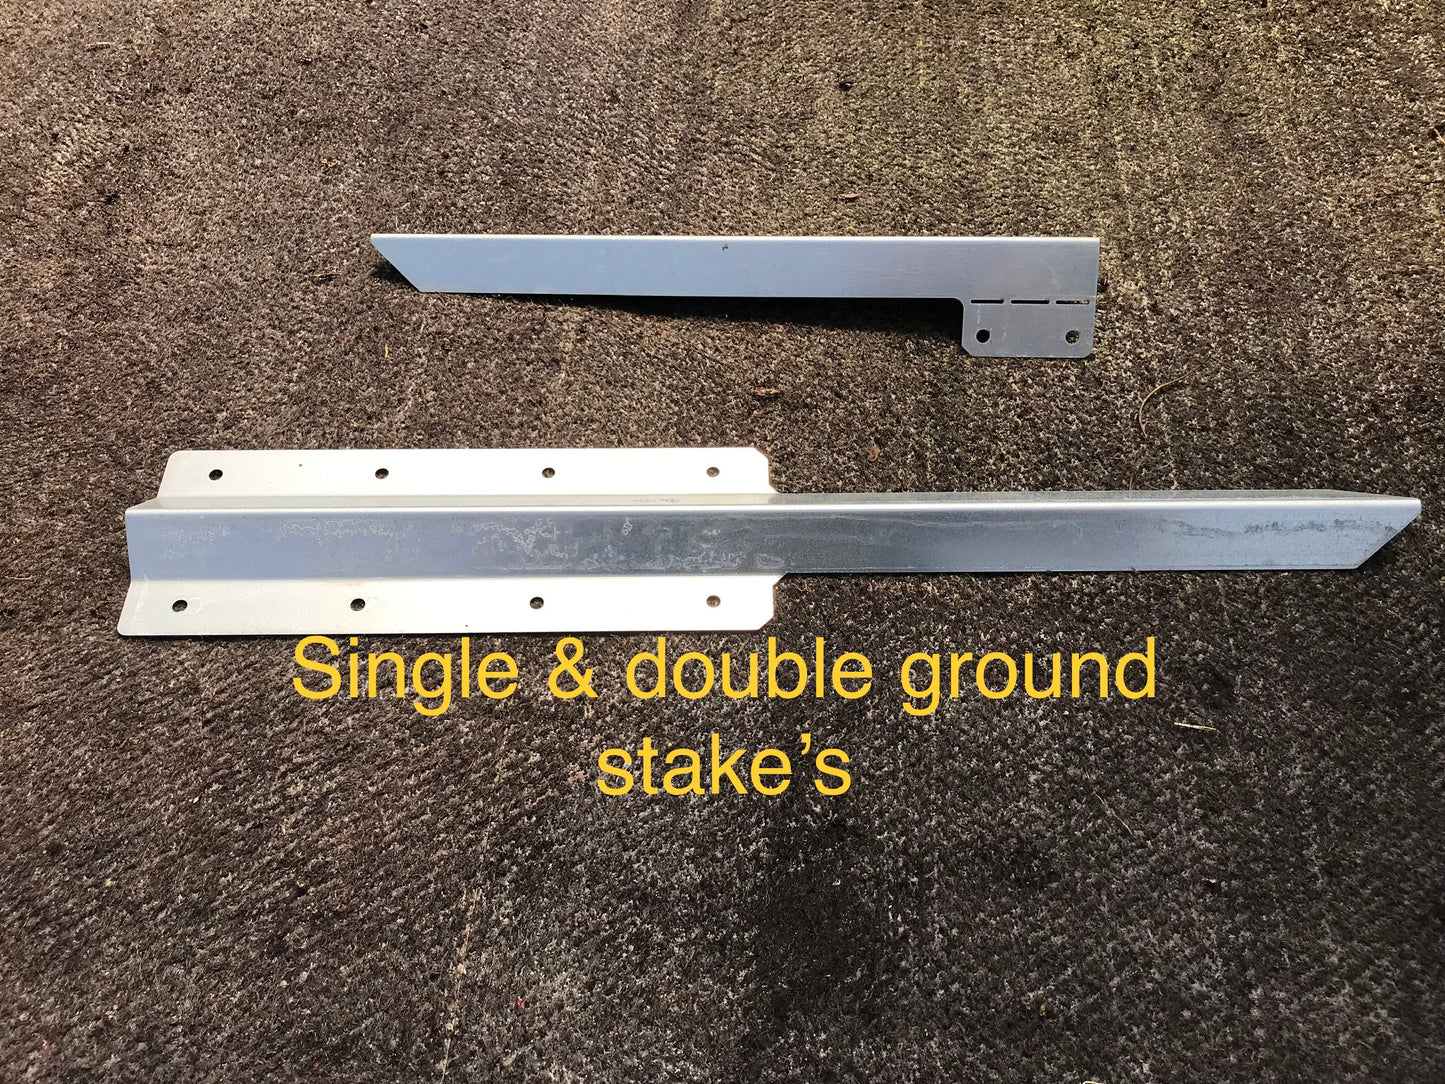 Two Tier Ground Stake